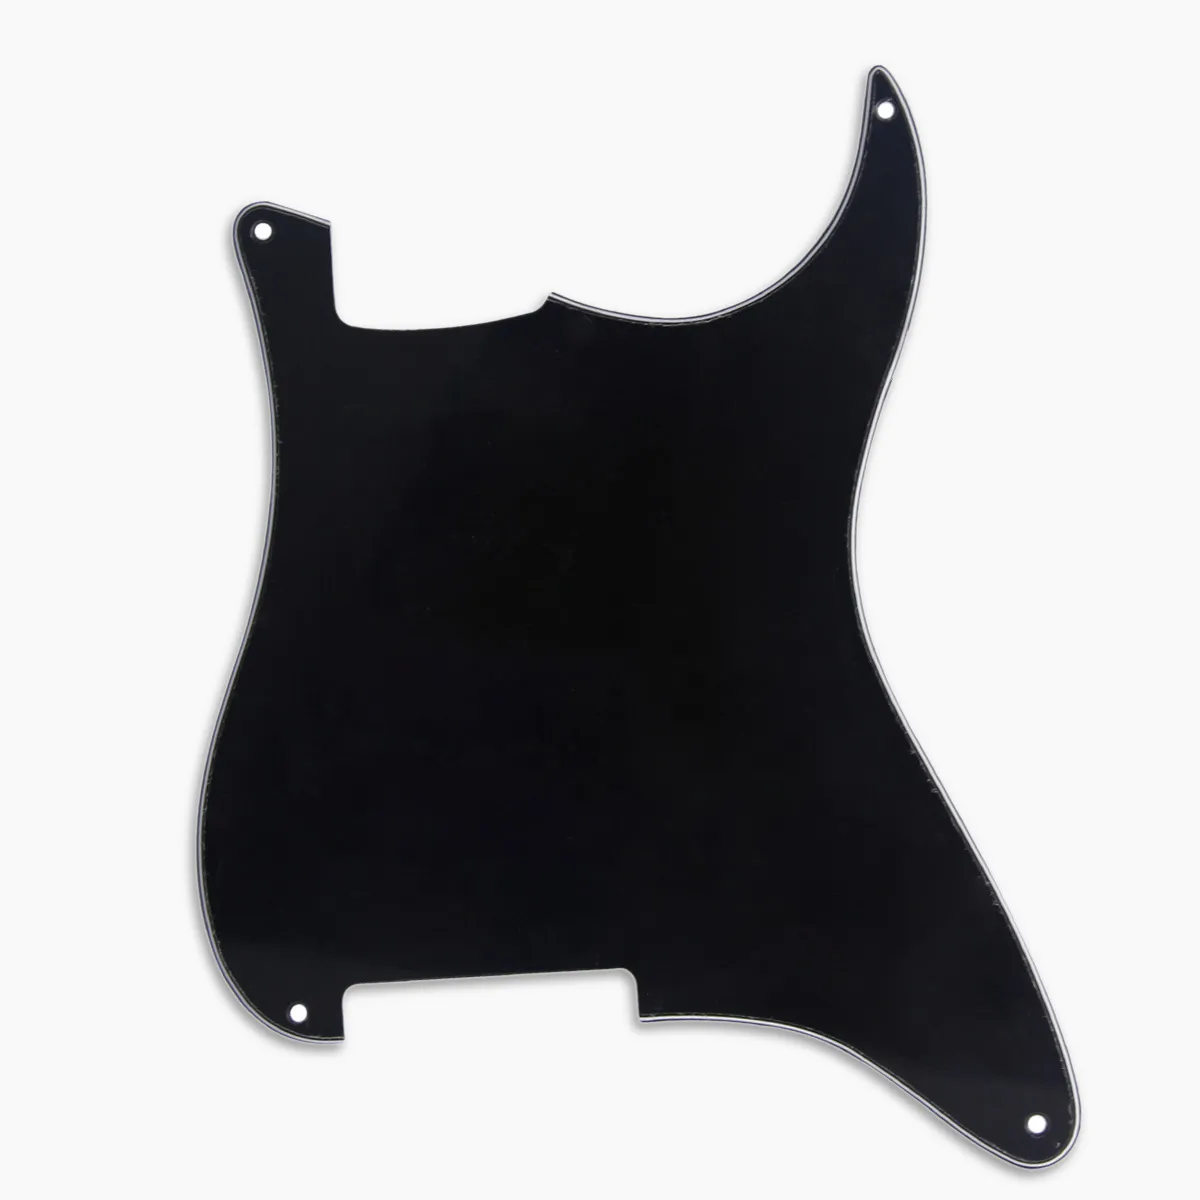 3Ply Guitar Blank Pickguard Scratch Plate 4 Hole with Screws for Guitar Accessories Custom DIY Black